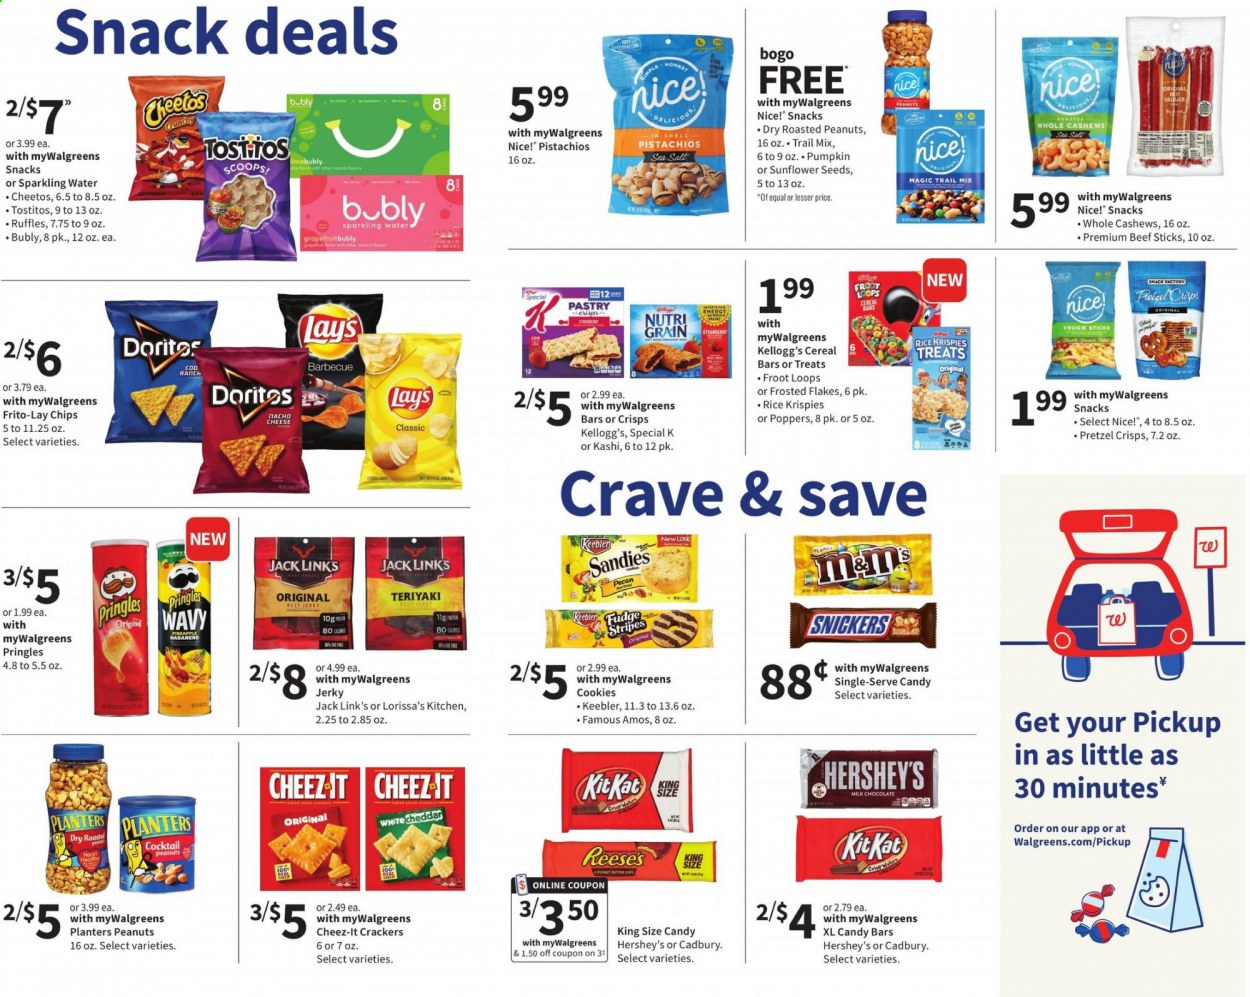 thumbnail - Walgreens Flyer - 07/11/2021 - 07/17/2021 - Sales products - beef jerky, jerky, cheese, Reese's, Hershey's, cookies, fudge, milk chocolate, chocolate, snack, Snickers, cereal bar, crackers, Kellogg's, Cadbury, Keebler, Doritos, Pringles, Cheetos, chips, Lay’s, Frito-Lay, Nice!, Cheez-It, Ruffles, Tostitos, pretzel crisps, Jack Link's, pumpkin, cereals, Rice Krispies, Frosted Flakes, Nutri-Grain, cashews, roasted peanuts, peanuts, pistachios, sunflower seeds, Planters, trail mix, sparkling water. Page 5.